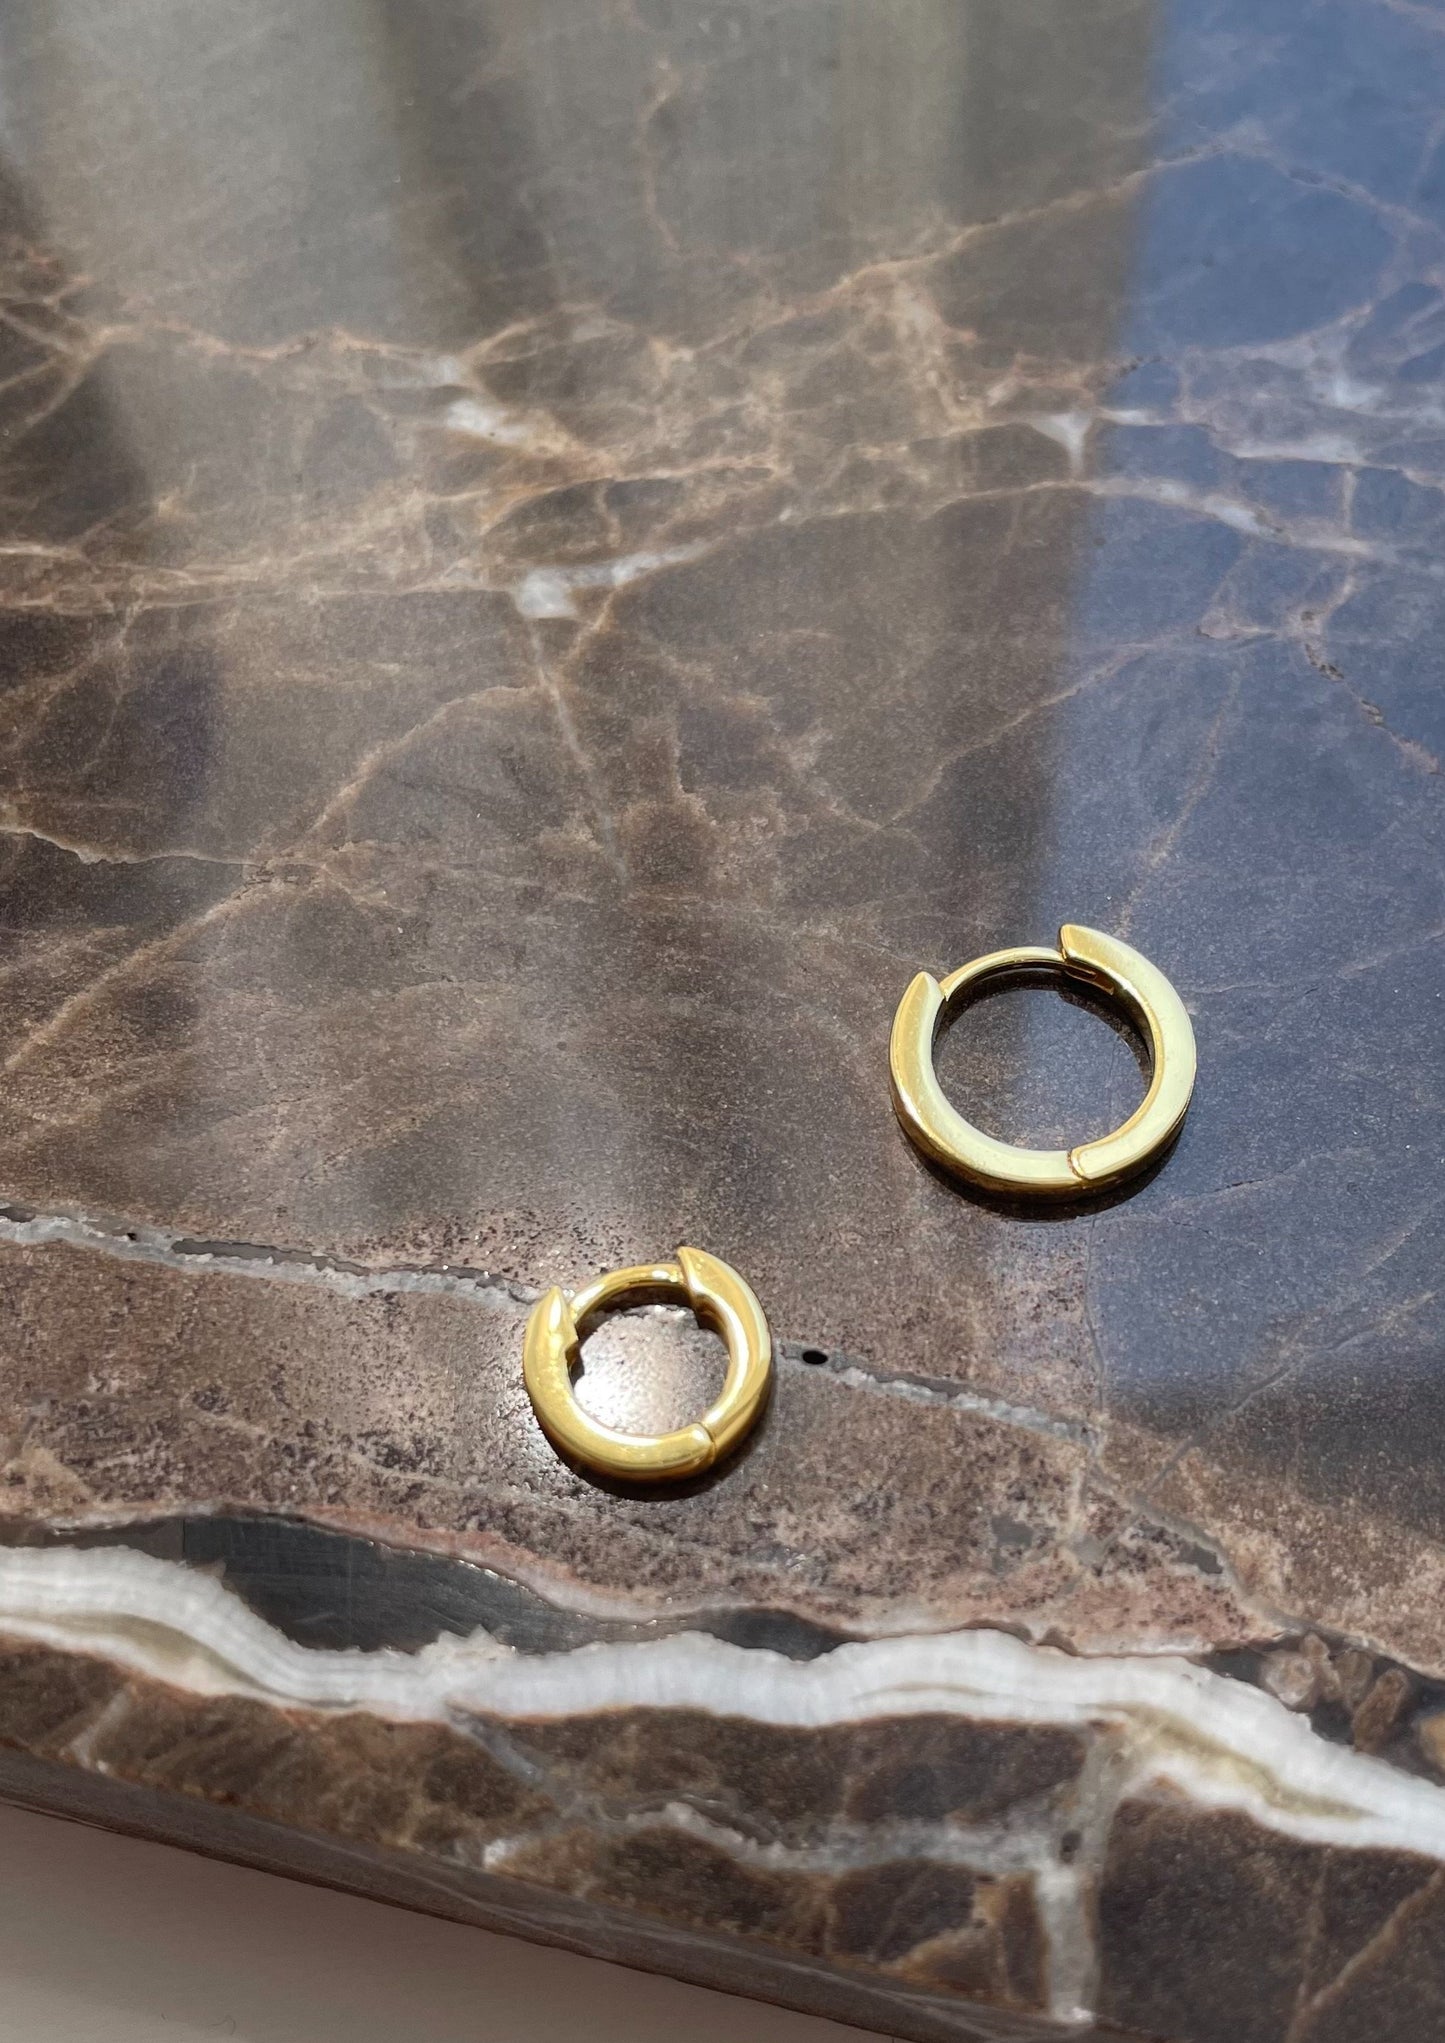 Featured: The Gold Huggie earrings in Size Small and Medium (6695458373713)